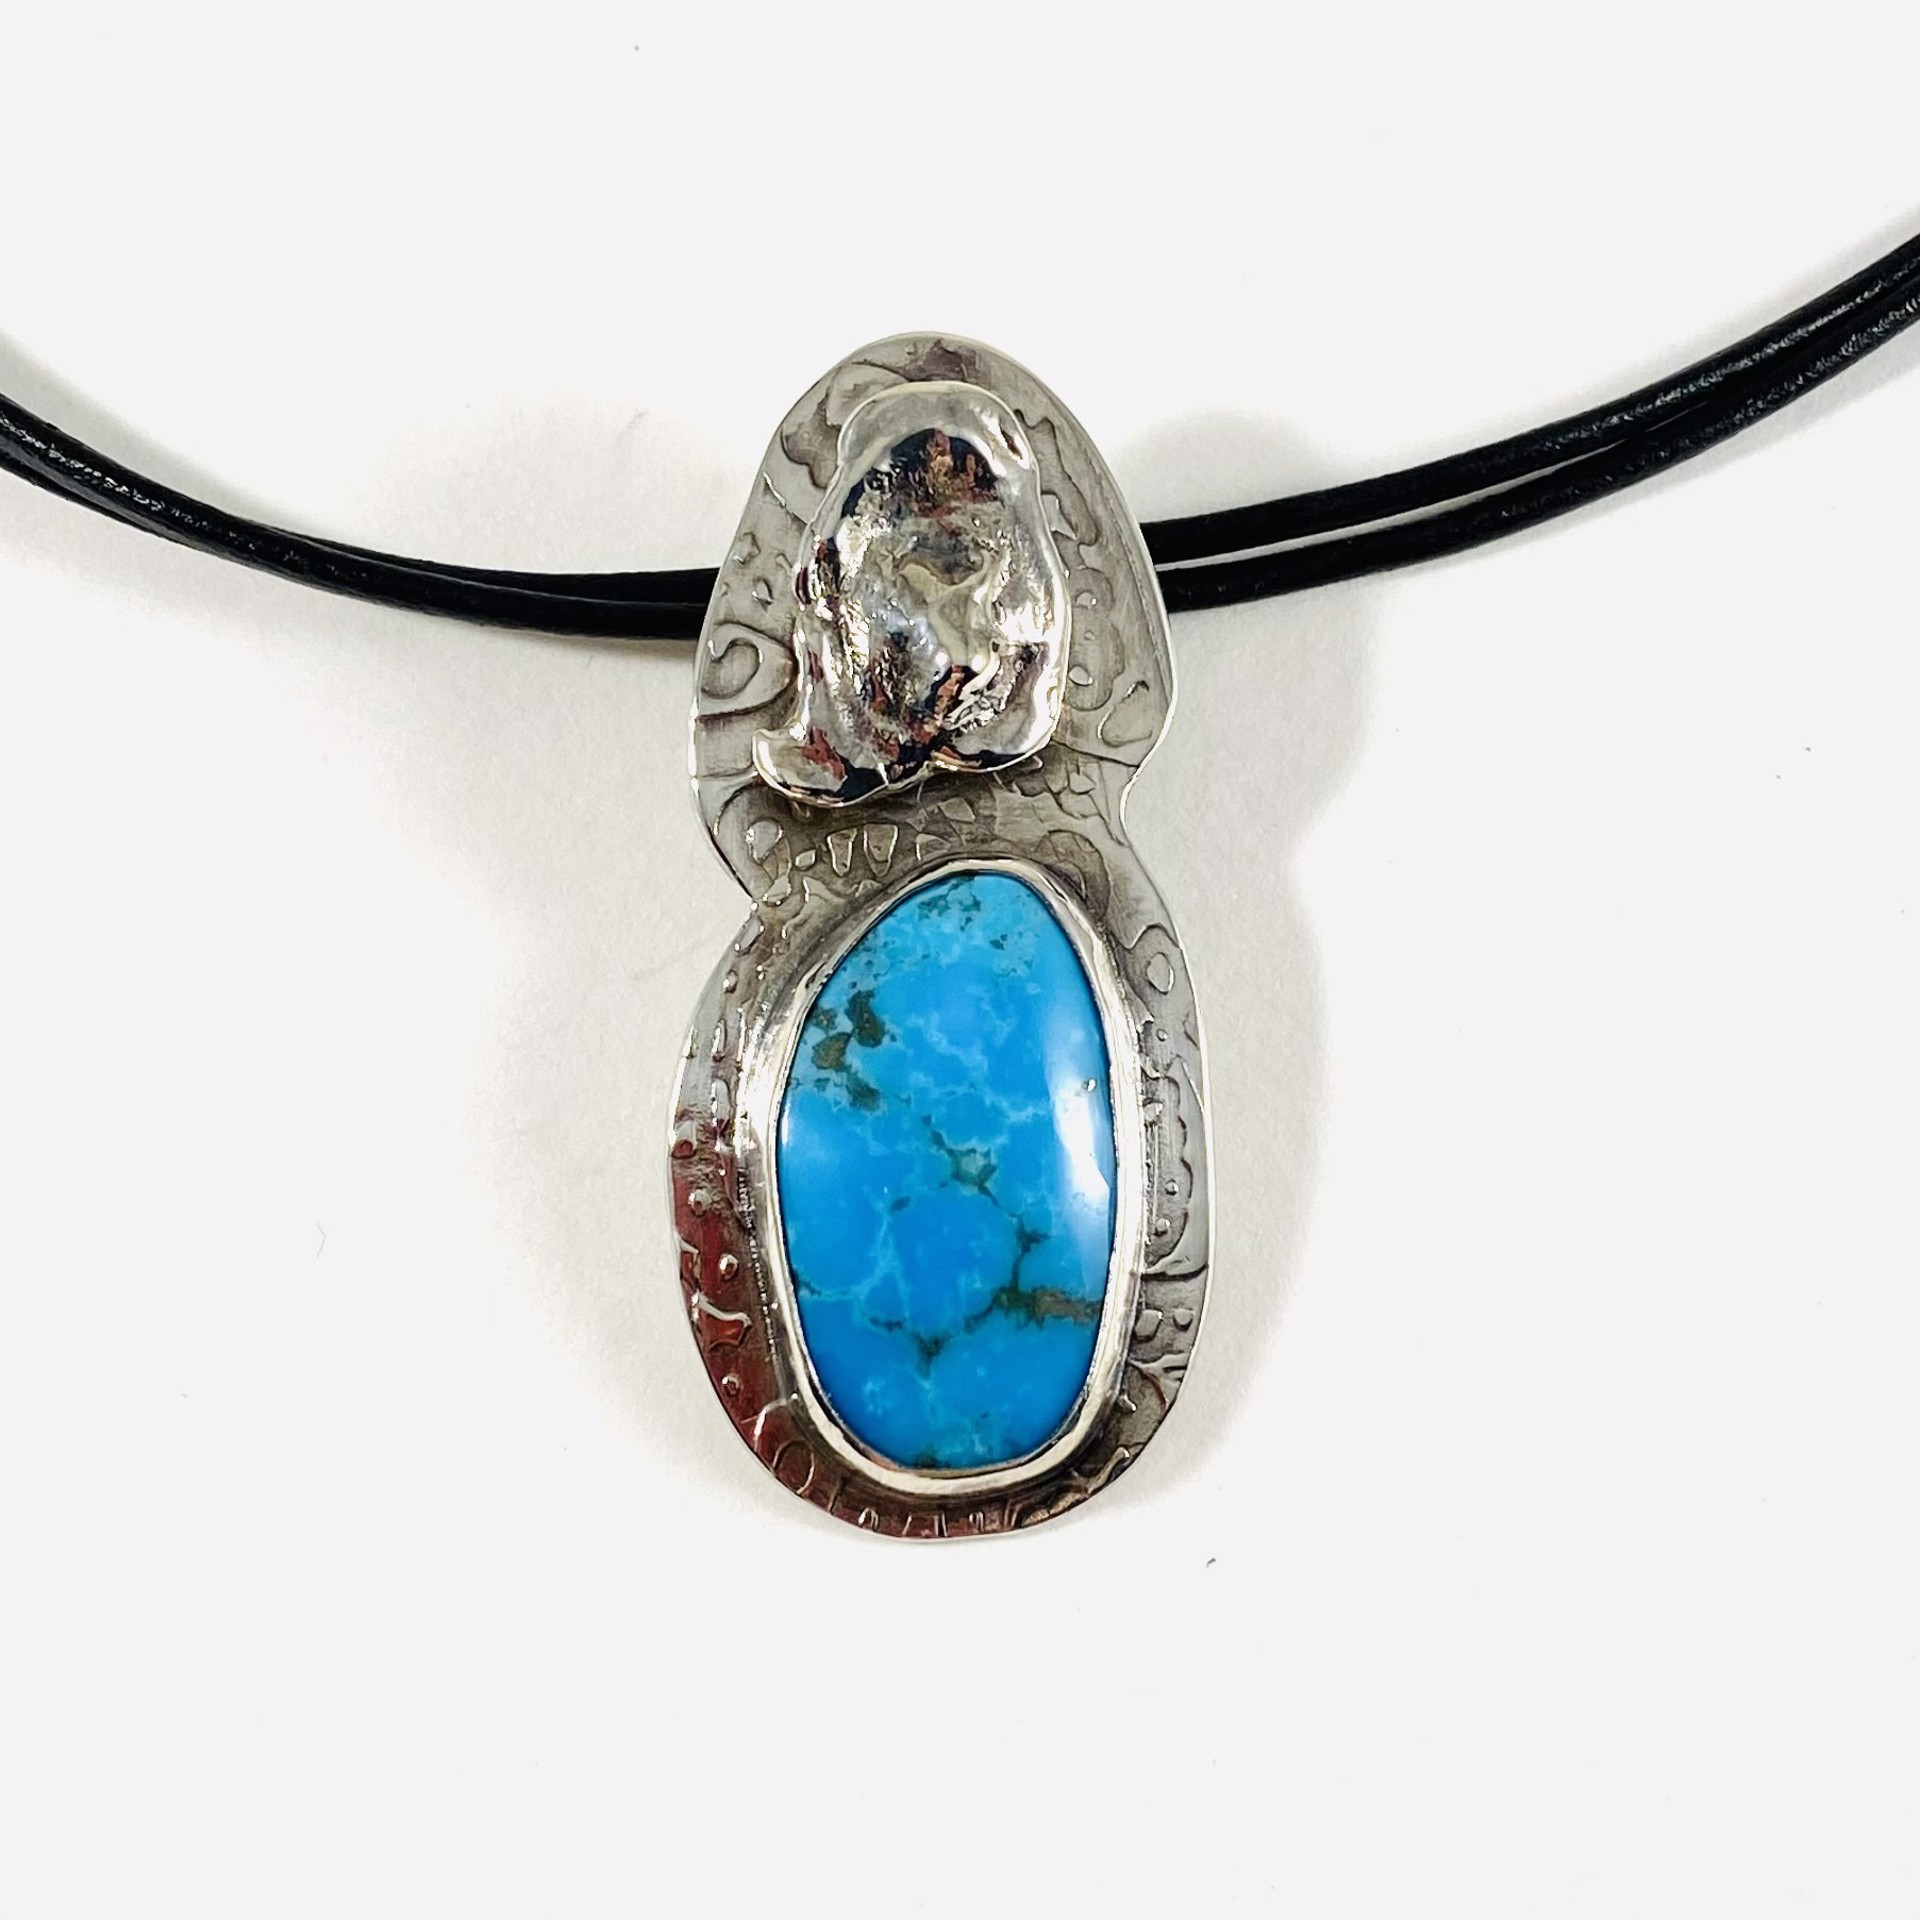 Kingsman Turquoise, Water Cast Sterling Nugget Pendant on Leather Cord Necklace AB21-43 by Anne Bivens